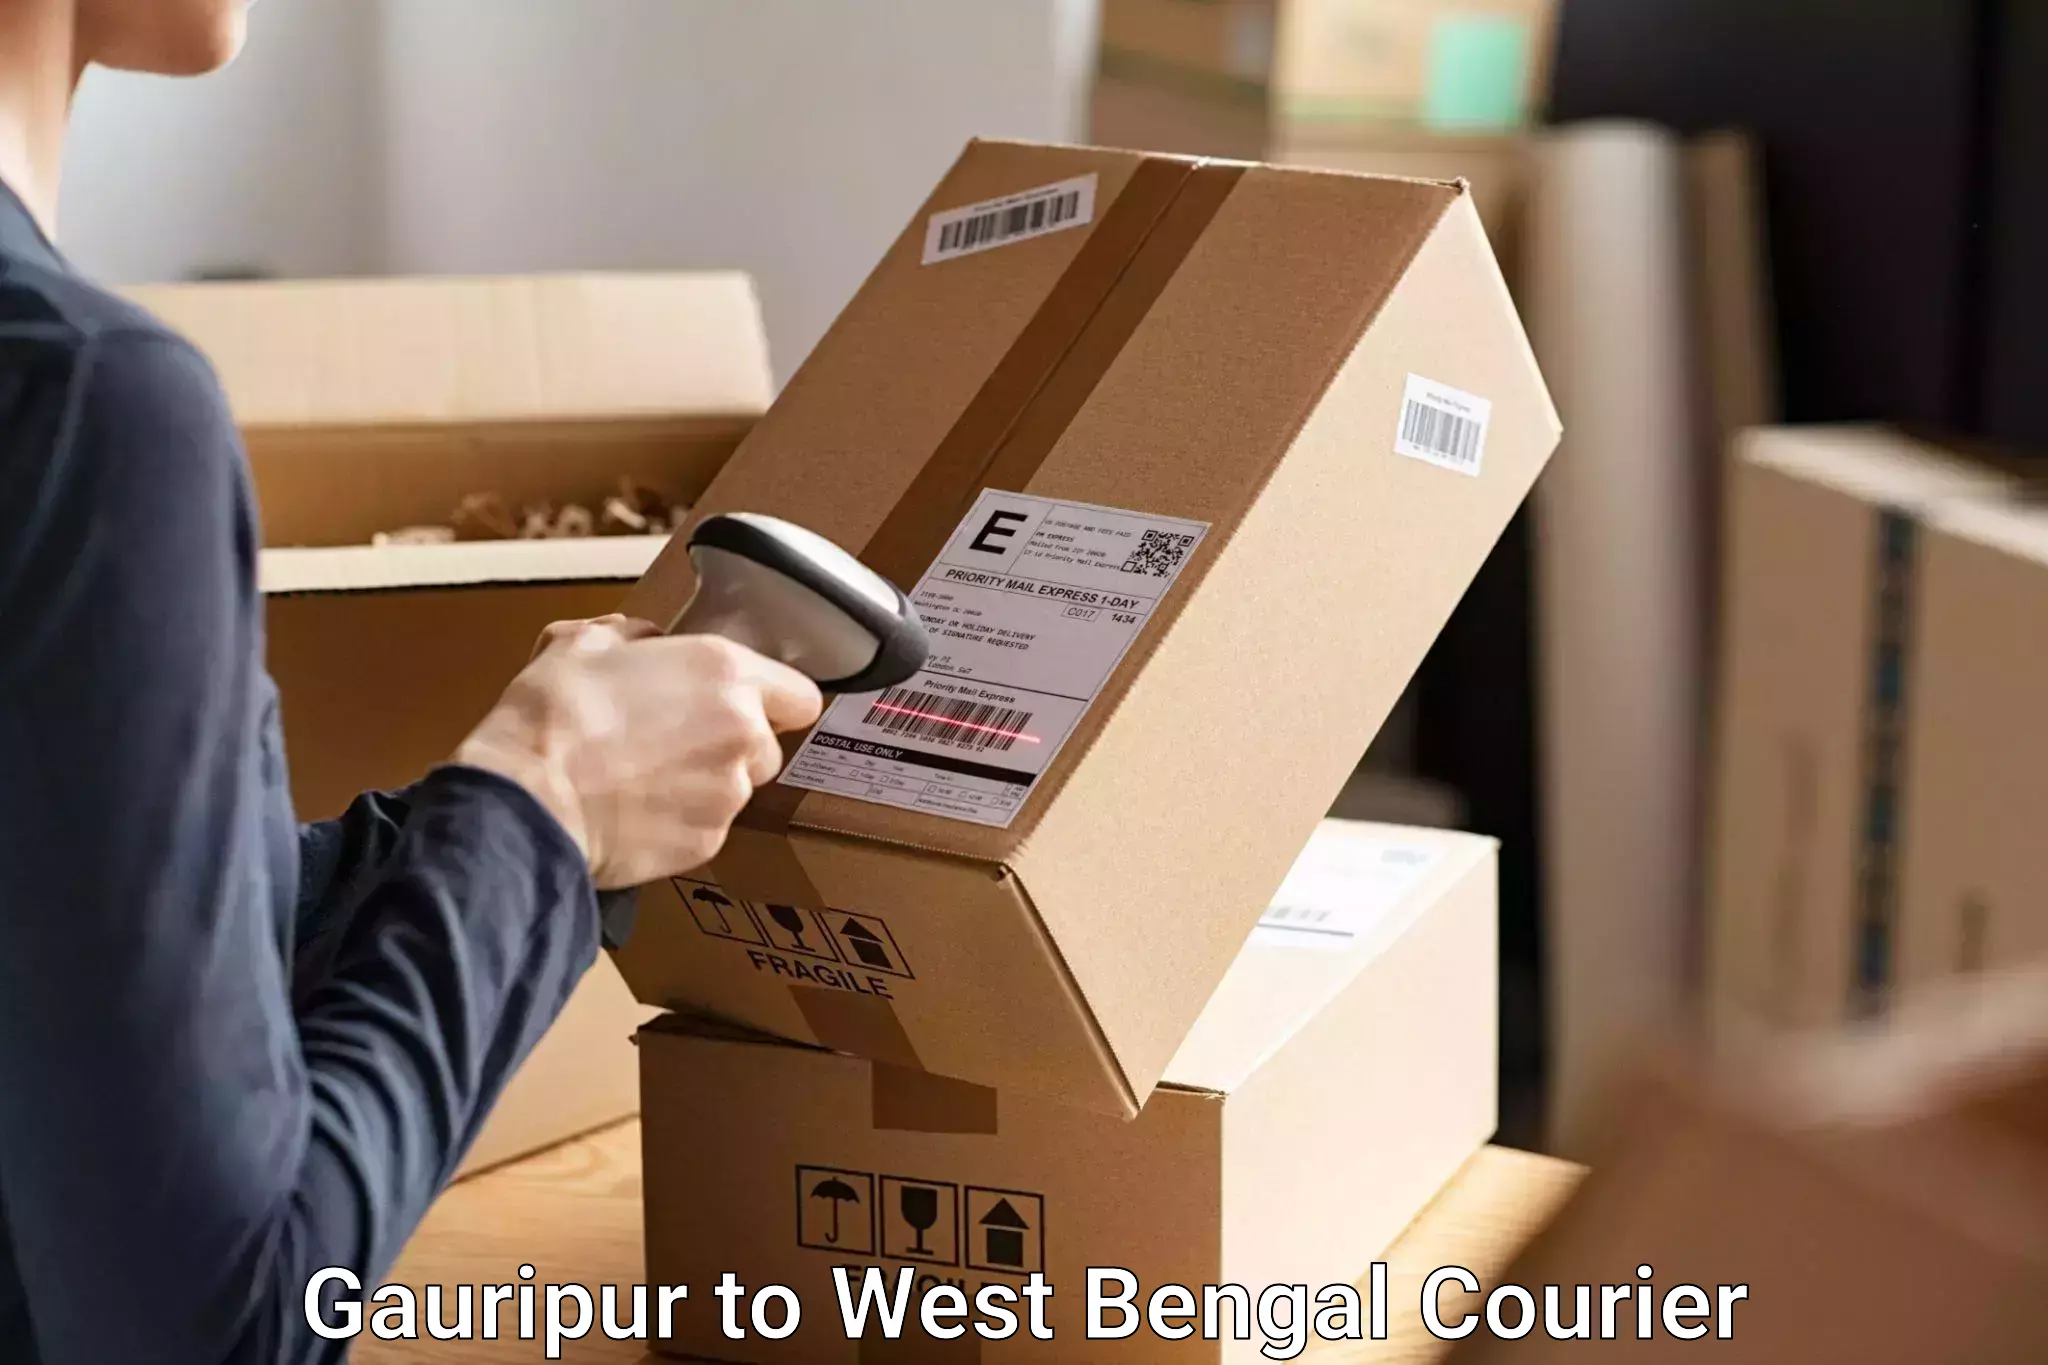 Baggage transport network Gauripur to West Bengal